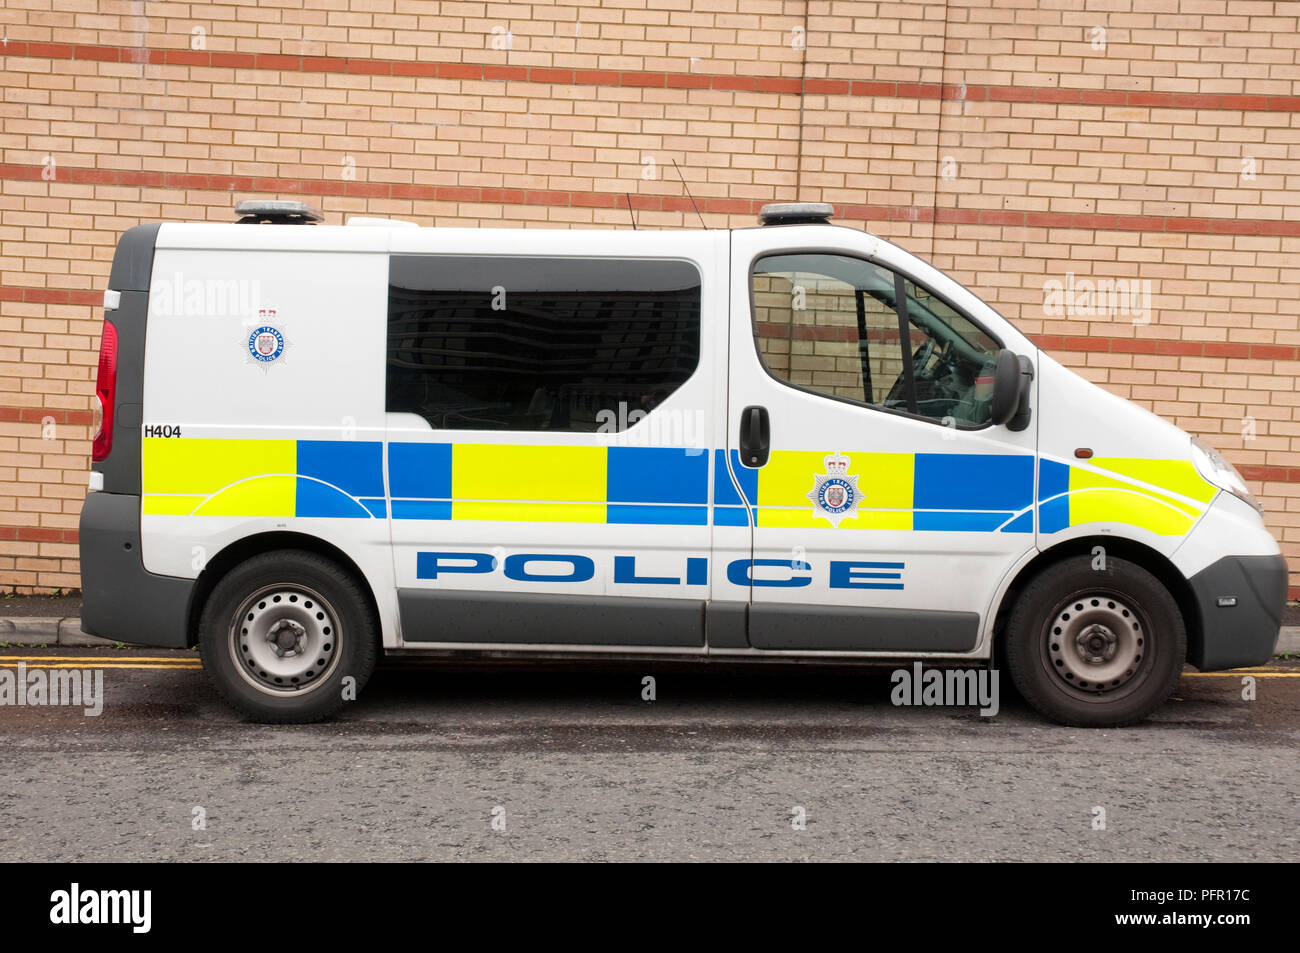 Great Britain, England, police van parked in street Stock Photo